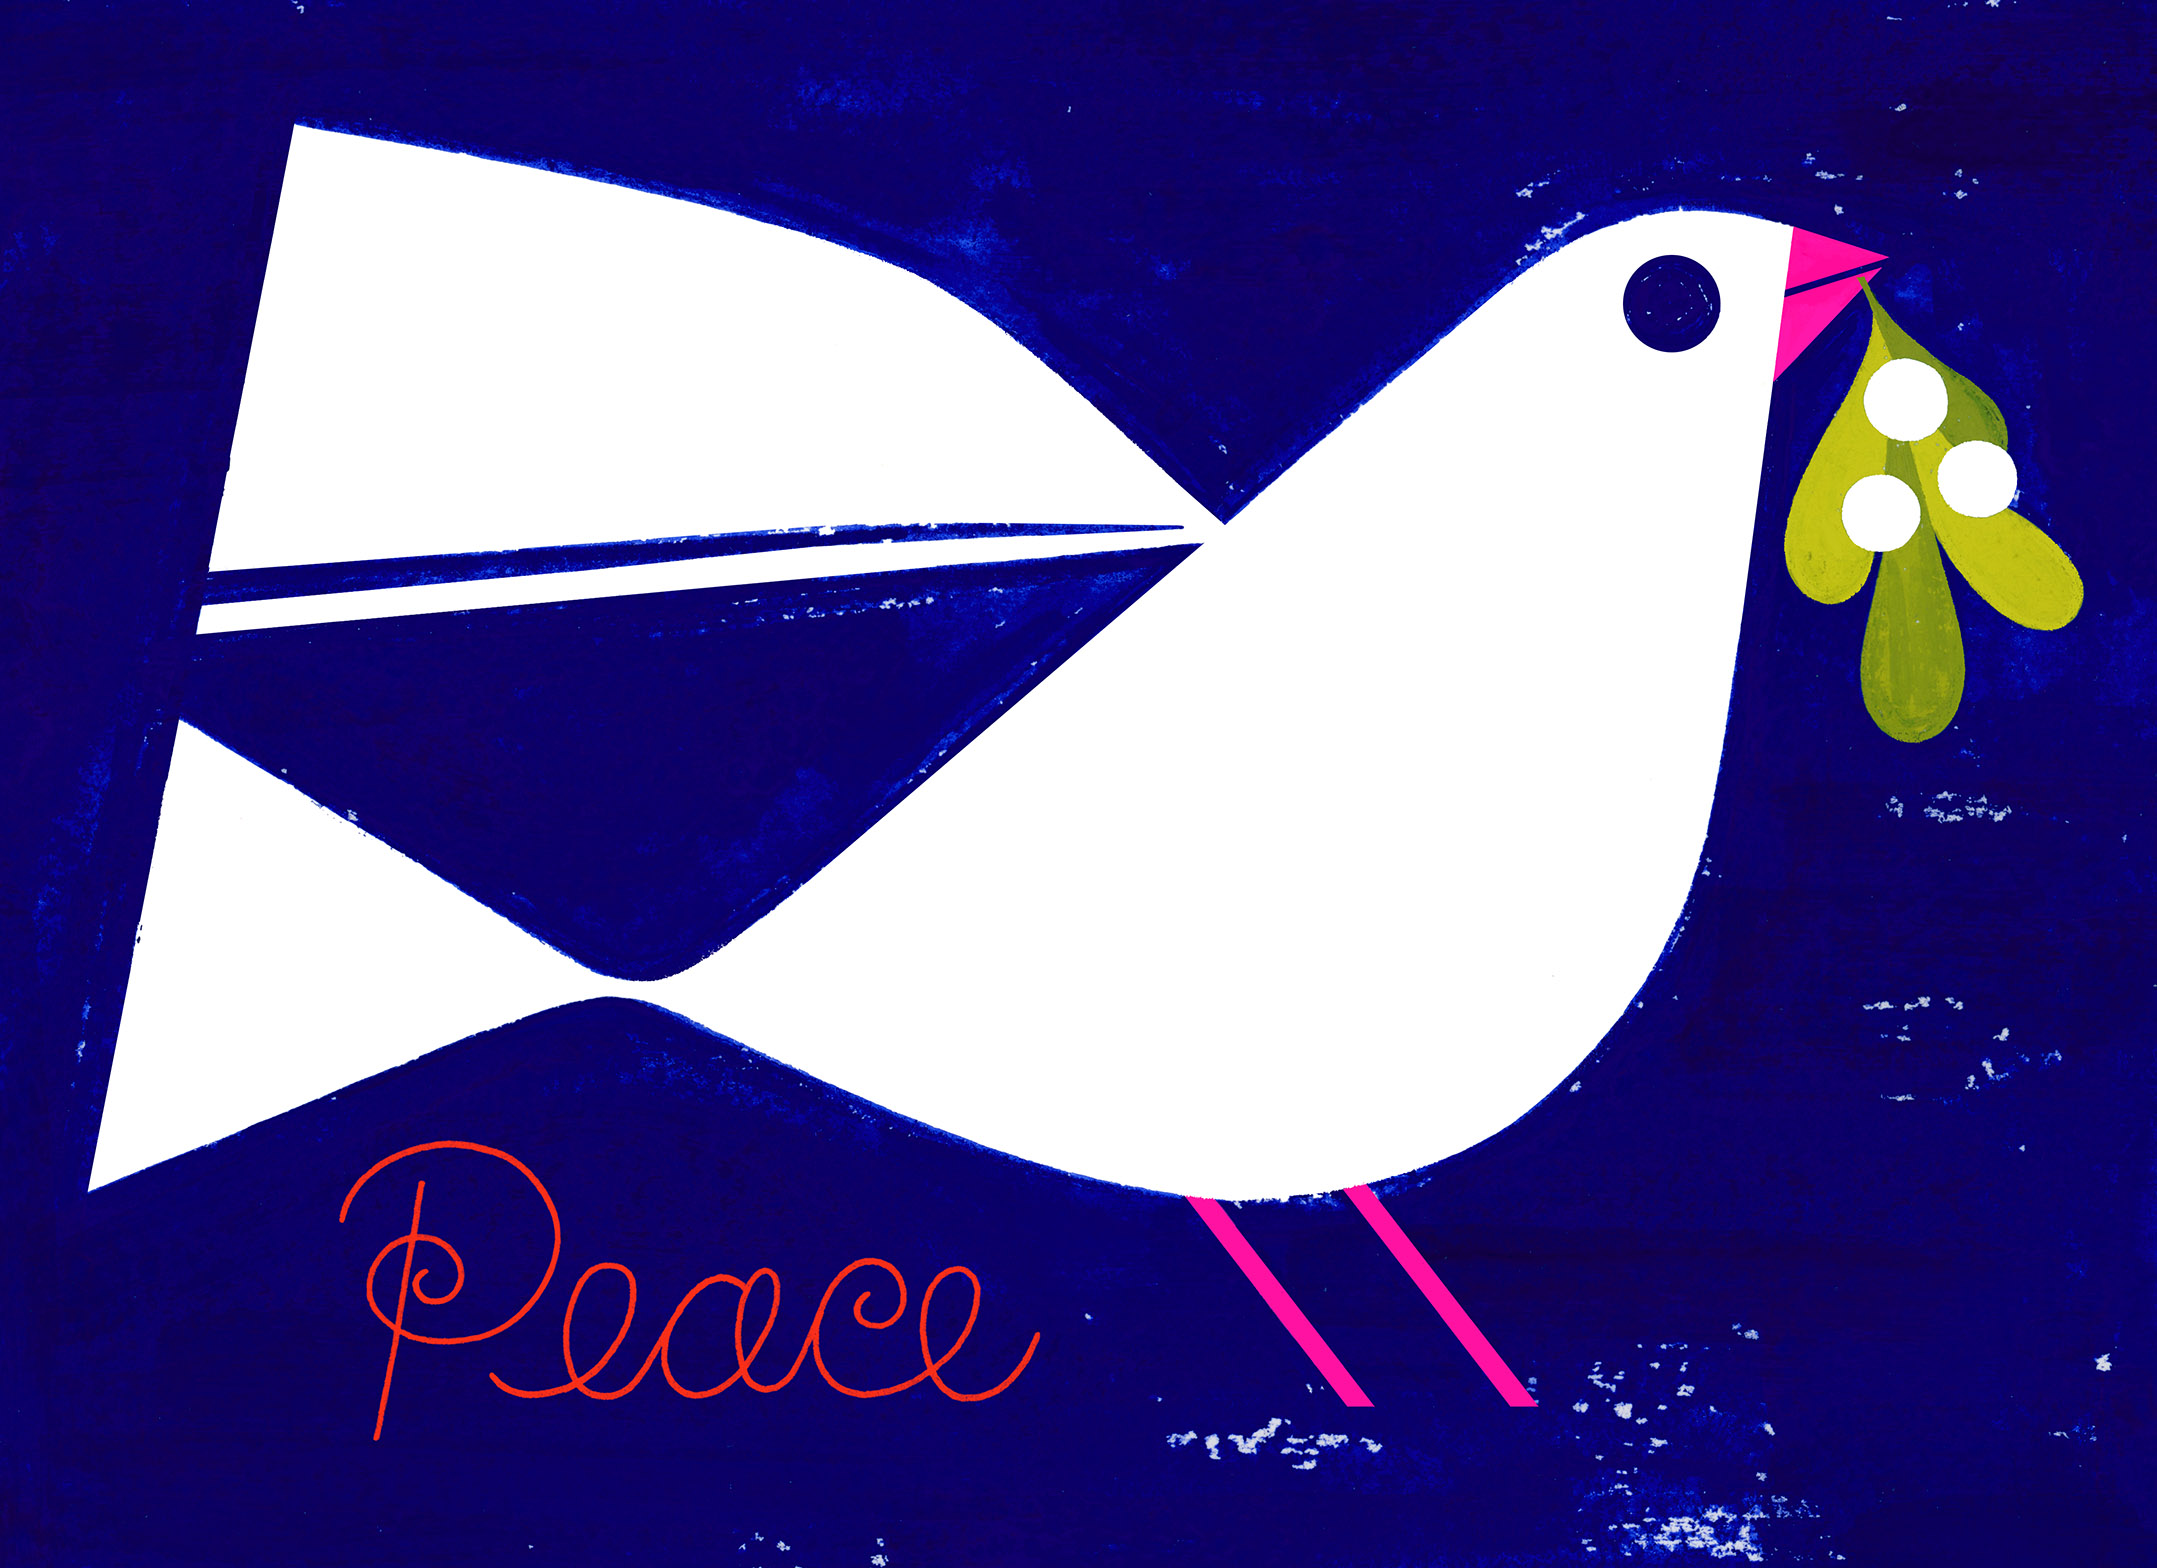 PeaceDovecropped300.jpg